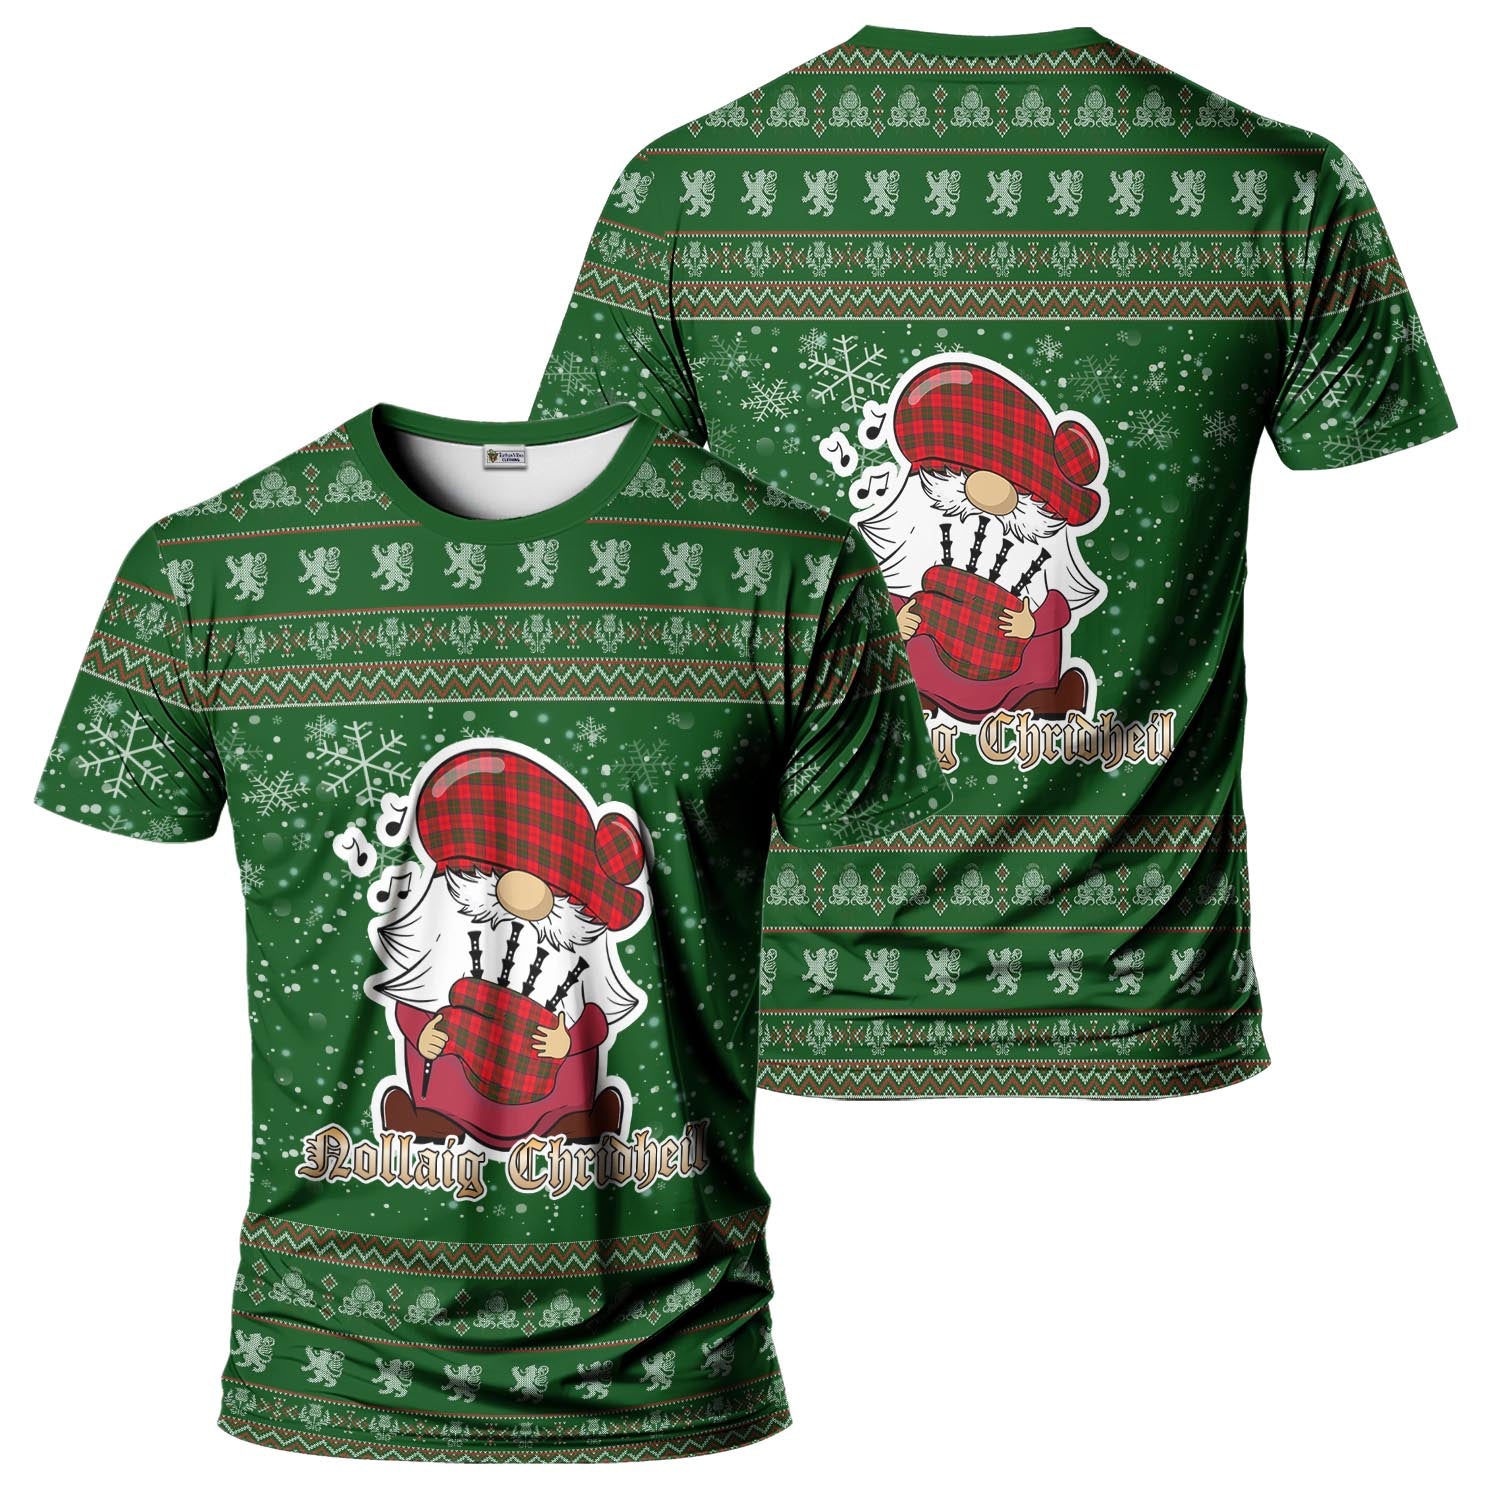 Grant Modern Clan Christmas Family T-Shirt with Funny Gnome Playing Bagpipes Men's Shirt Green - Tartanvibesclothing